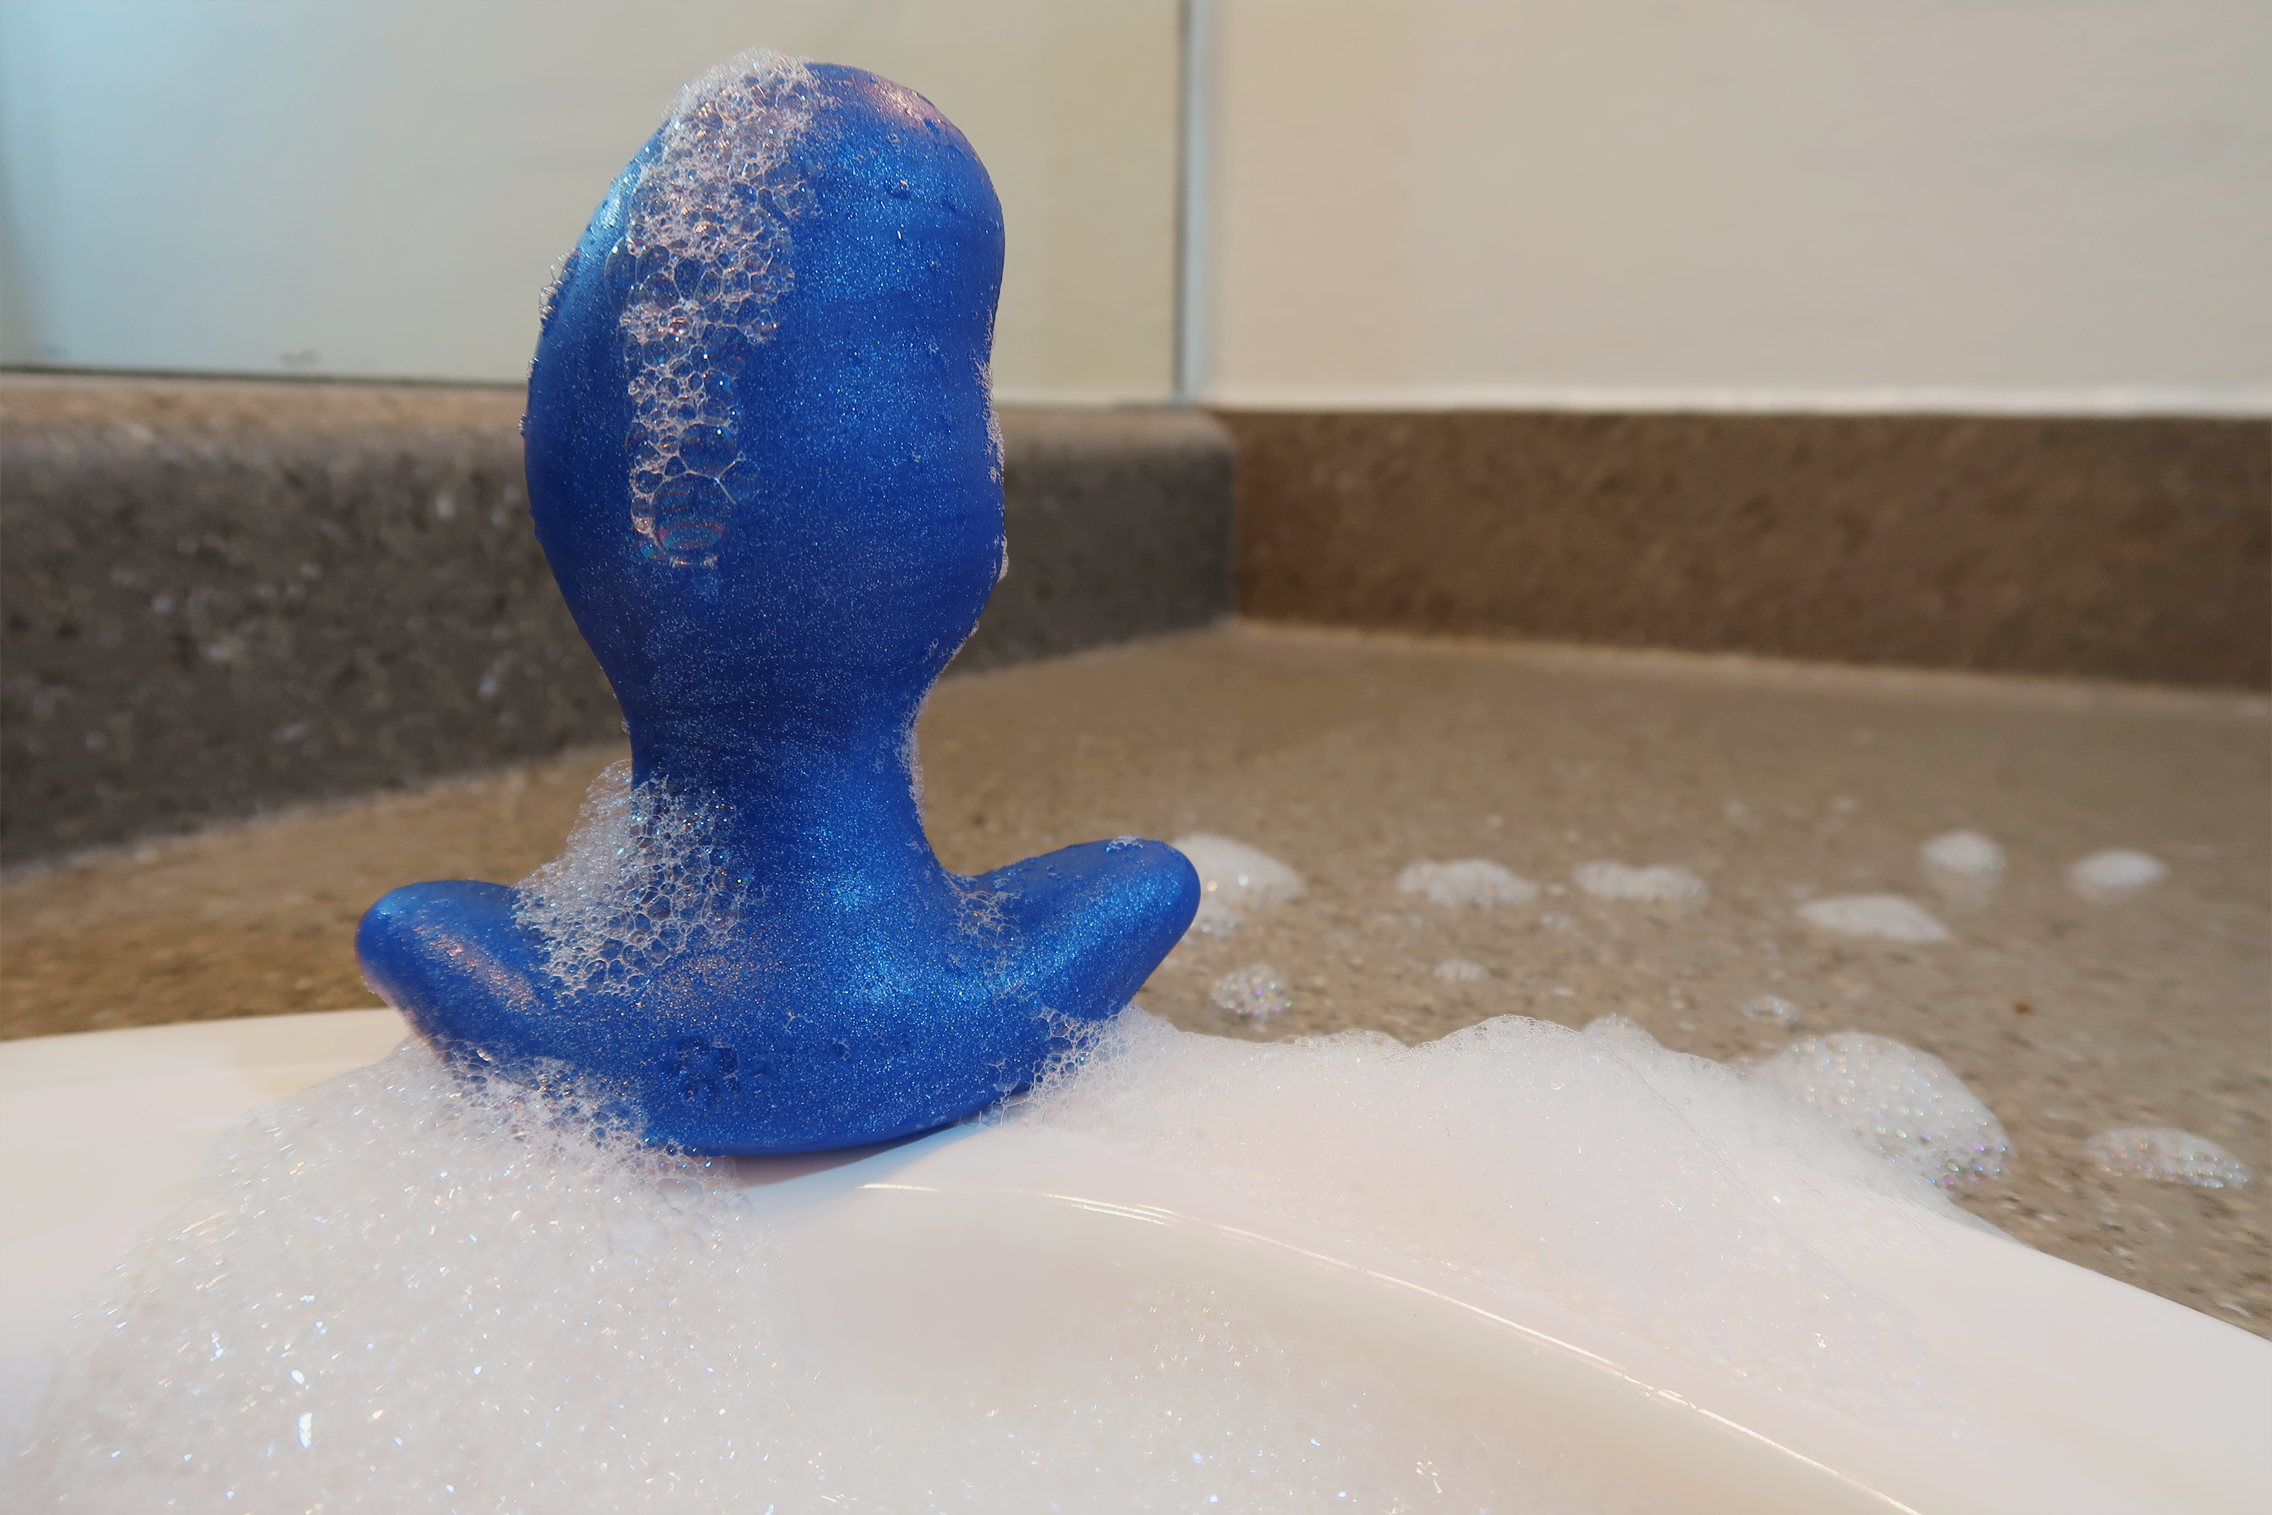 A picture of a large blue butt plug sitting on the edge of a sink, covered in suds. The plug is shaped like a kidney bean.